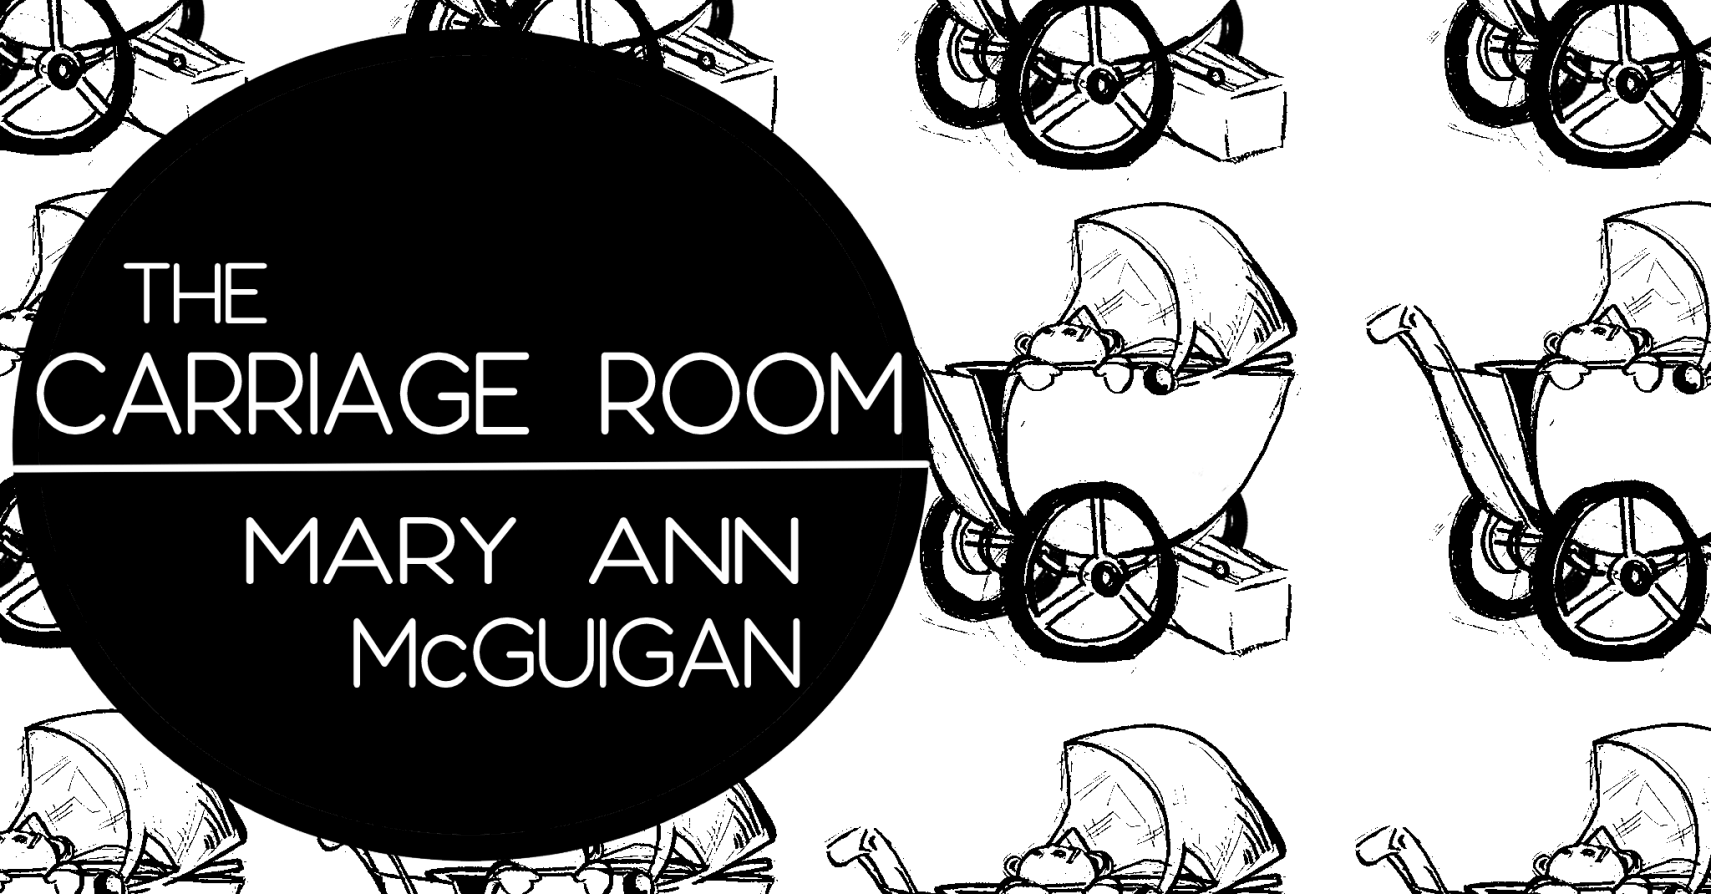 THE CARRIAGE ROOM by Mary Ann McGuigan